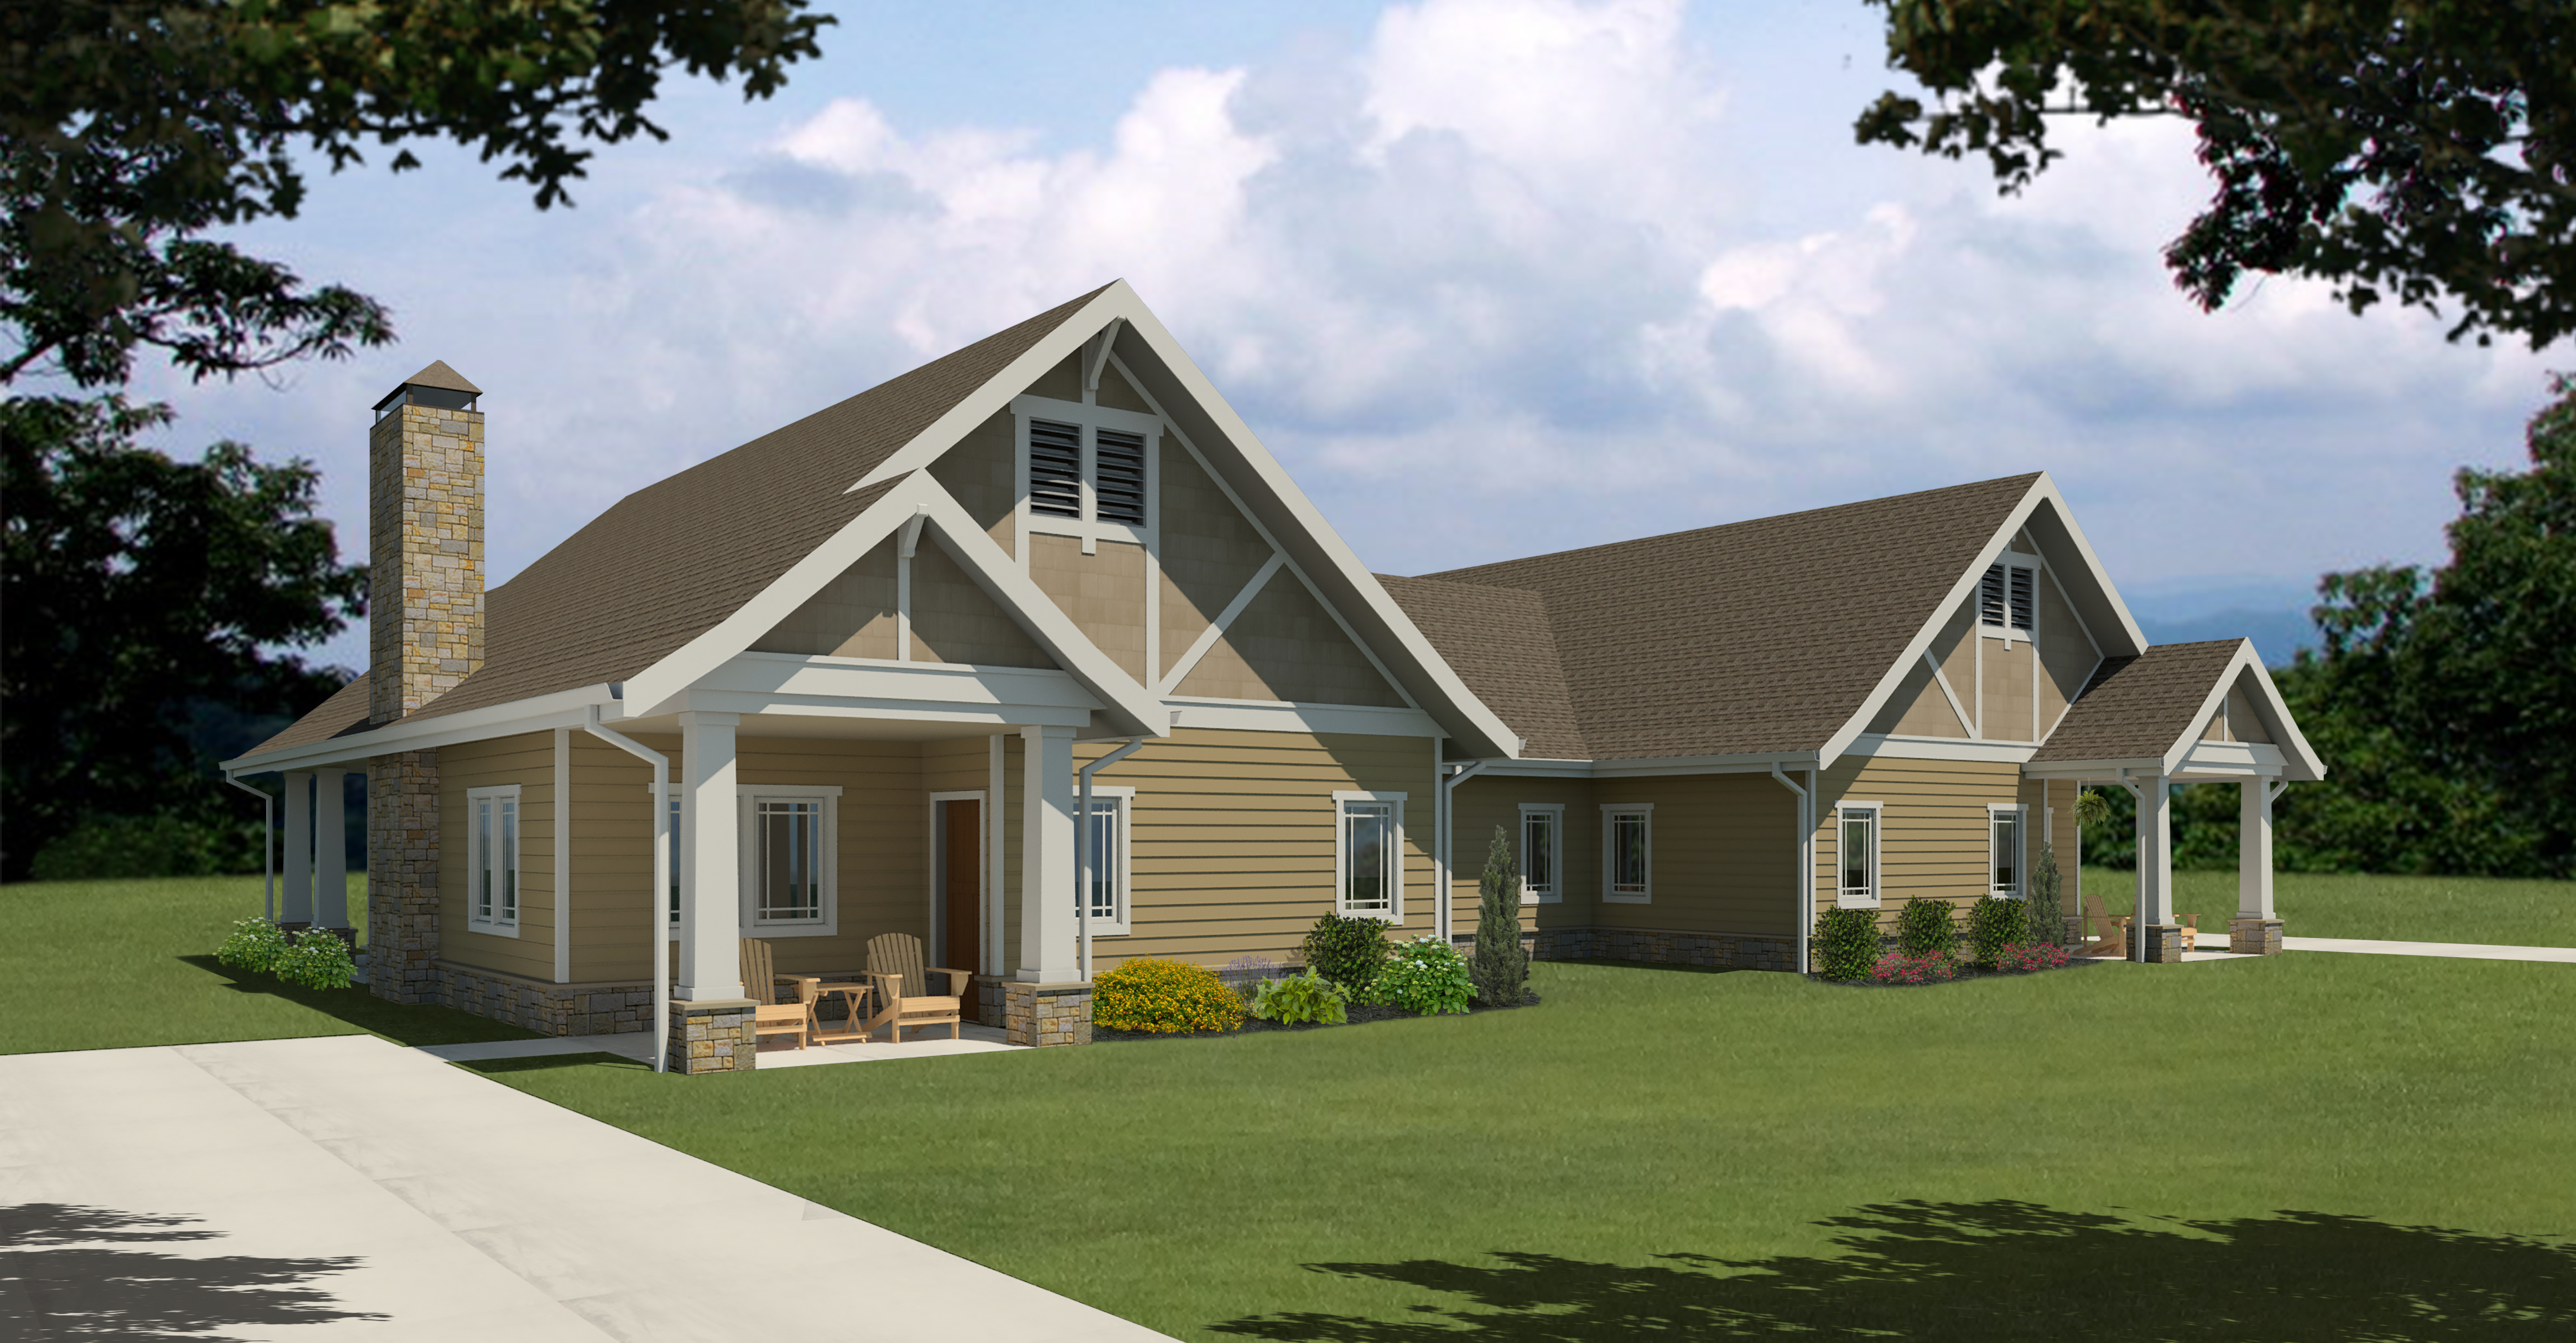 Rendering of a Village Home designed for private living with a neighborhood feel. 